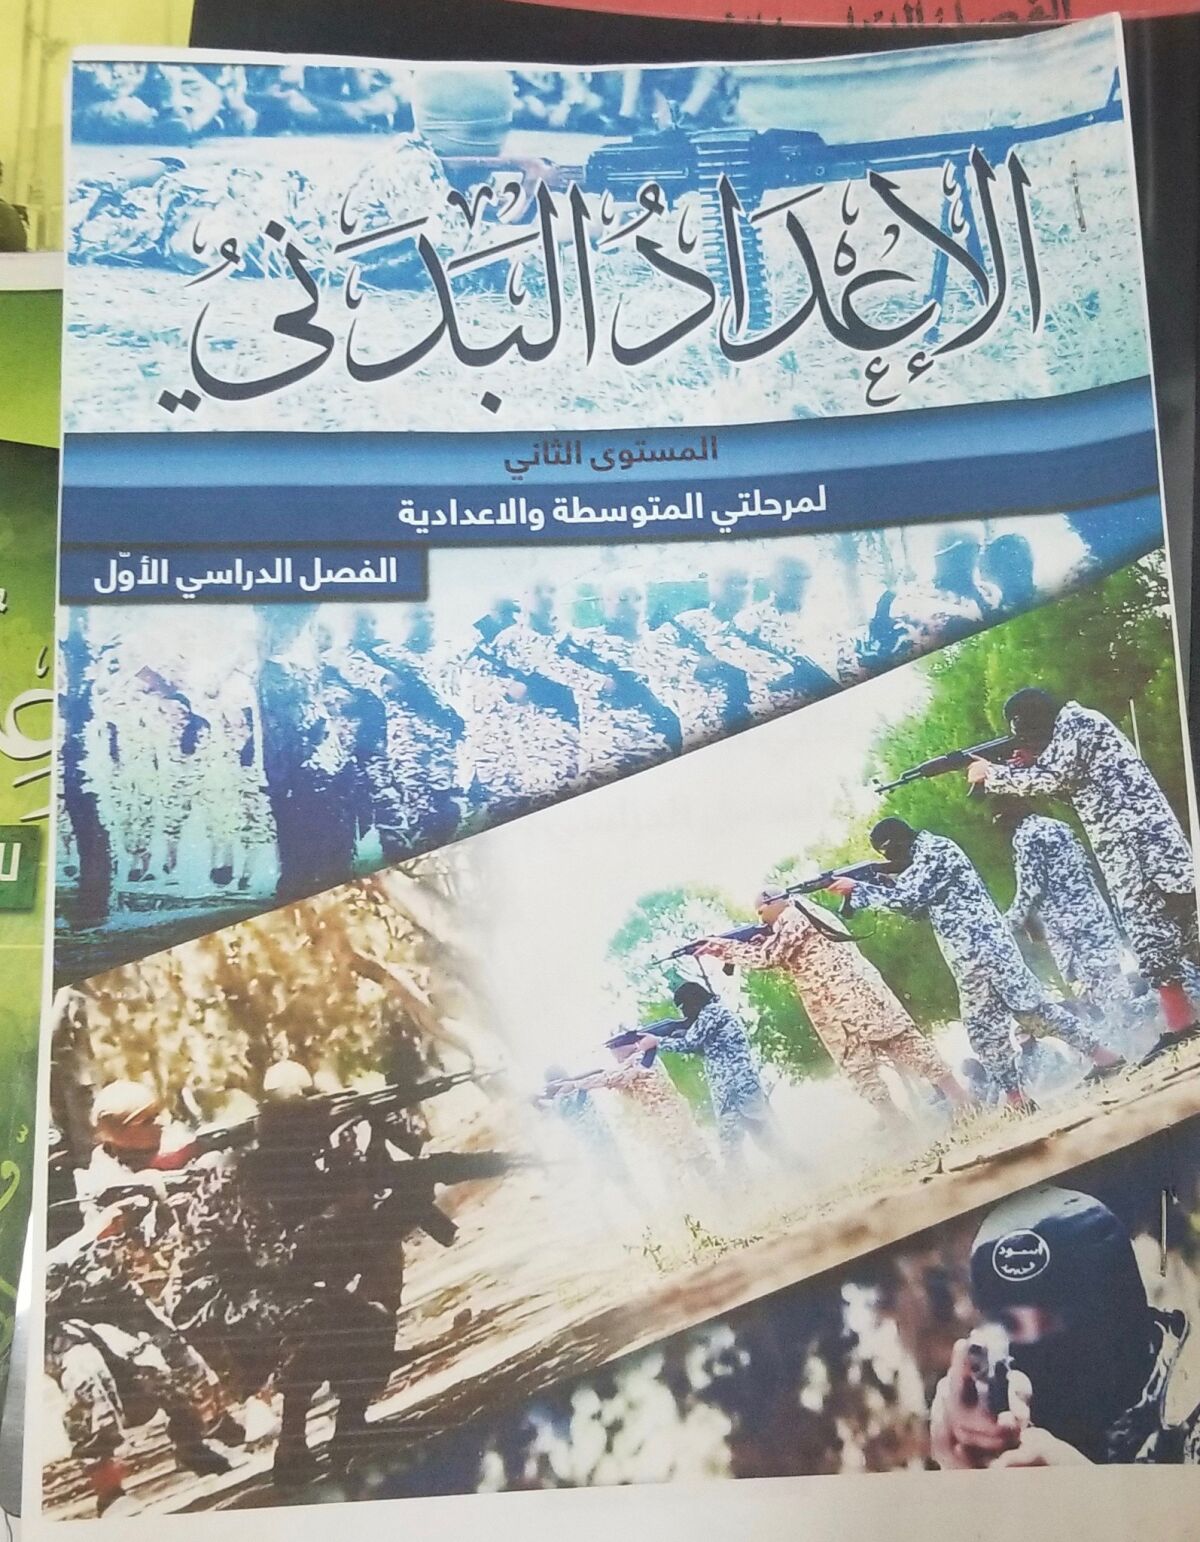 Islamic State material on physical education features tips on how to be a "fit mujahid."